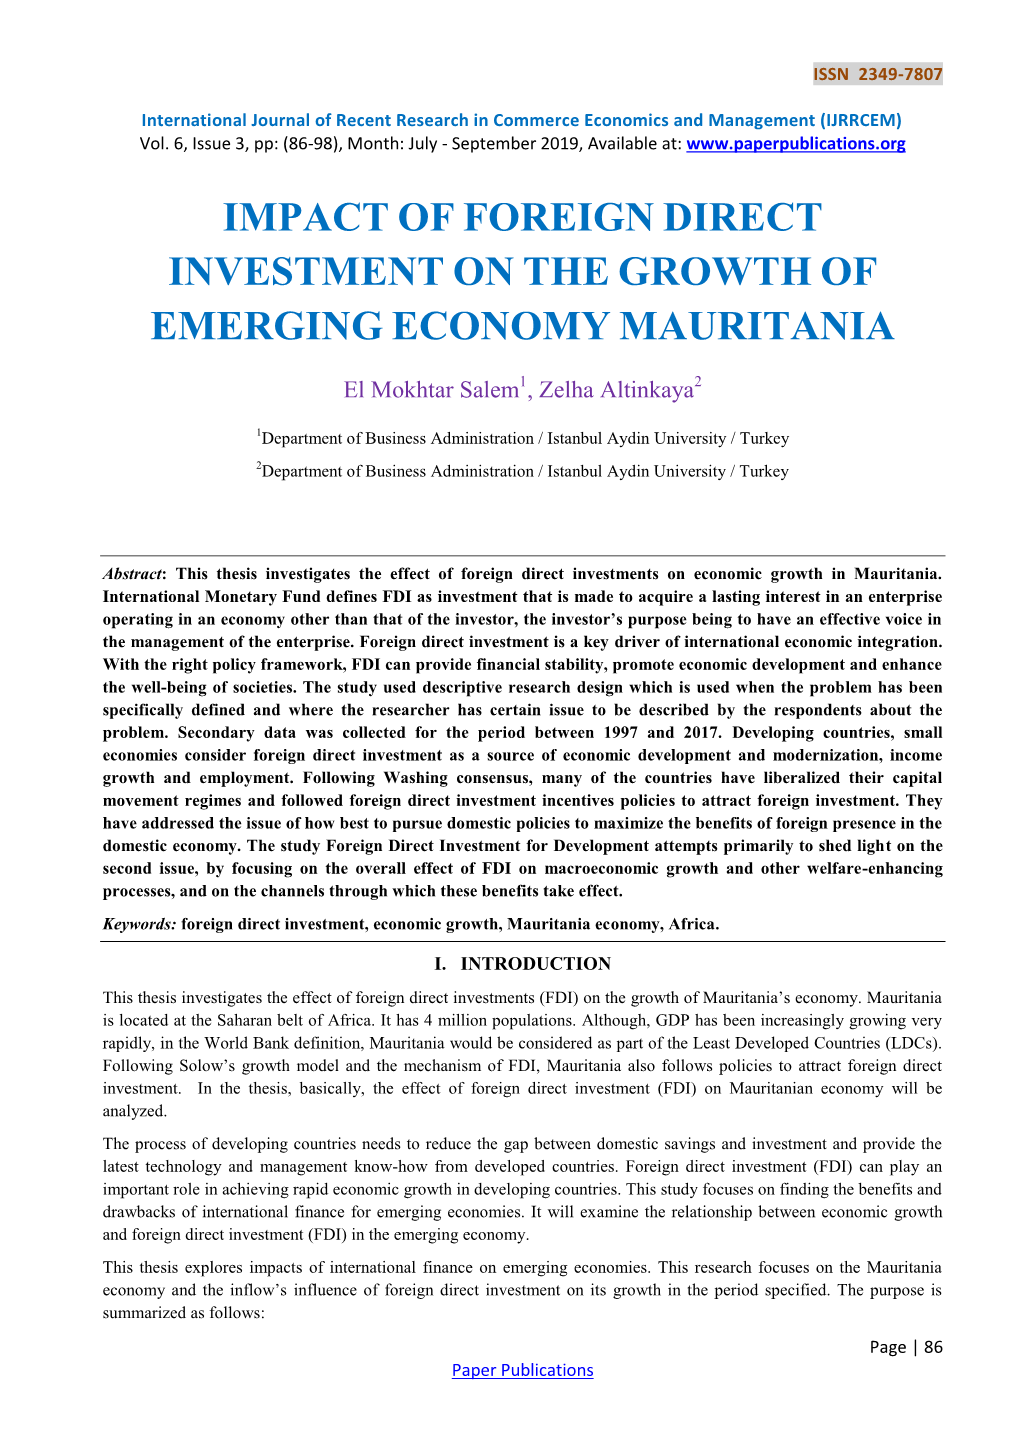 Impact of Foreign Direct Investment on the Growth of Emerging Economy Mauritania